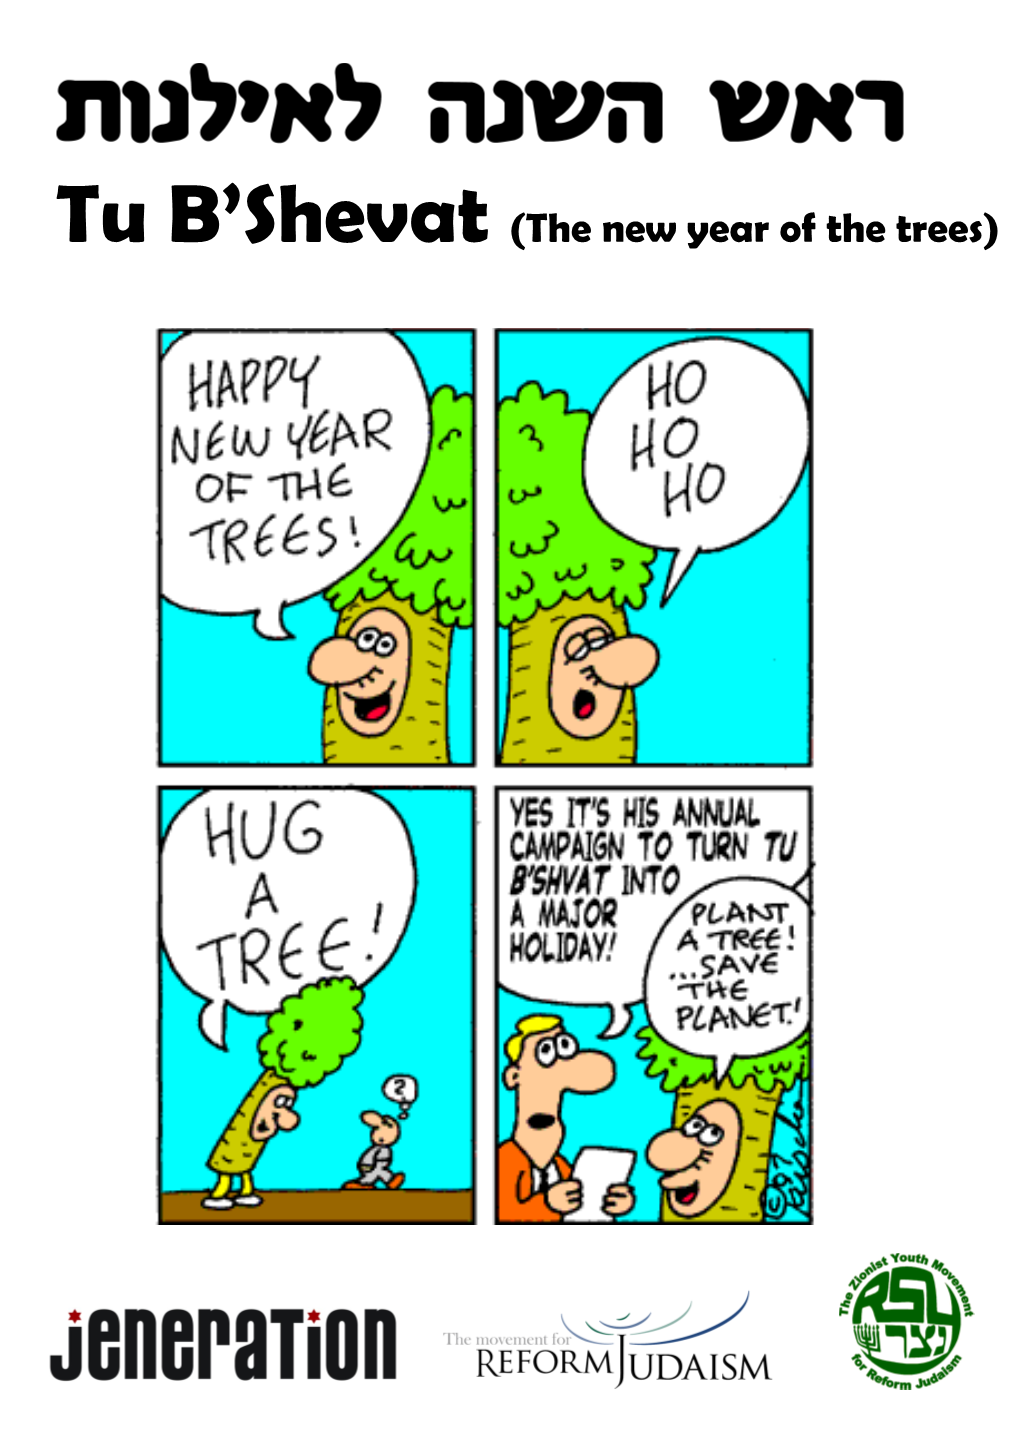 Tu B'shevat (The New Year of the Trees)